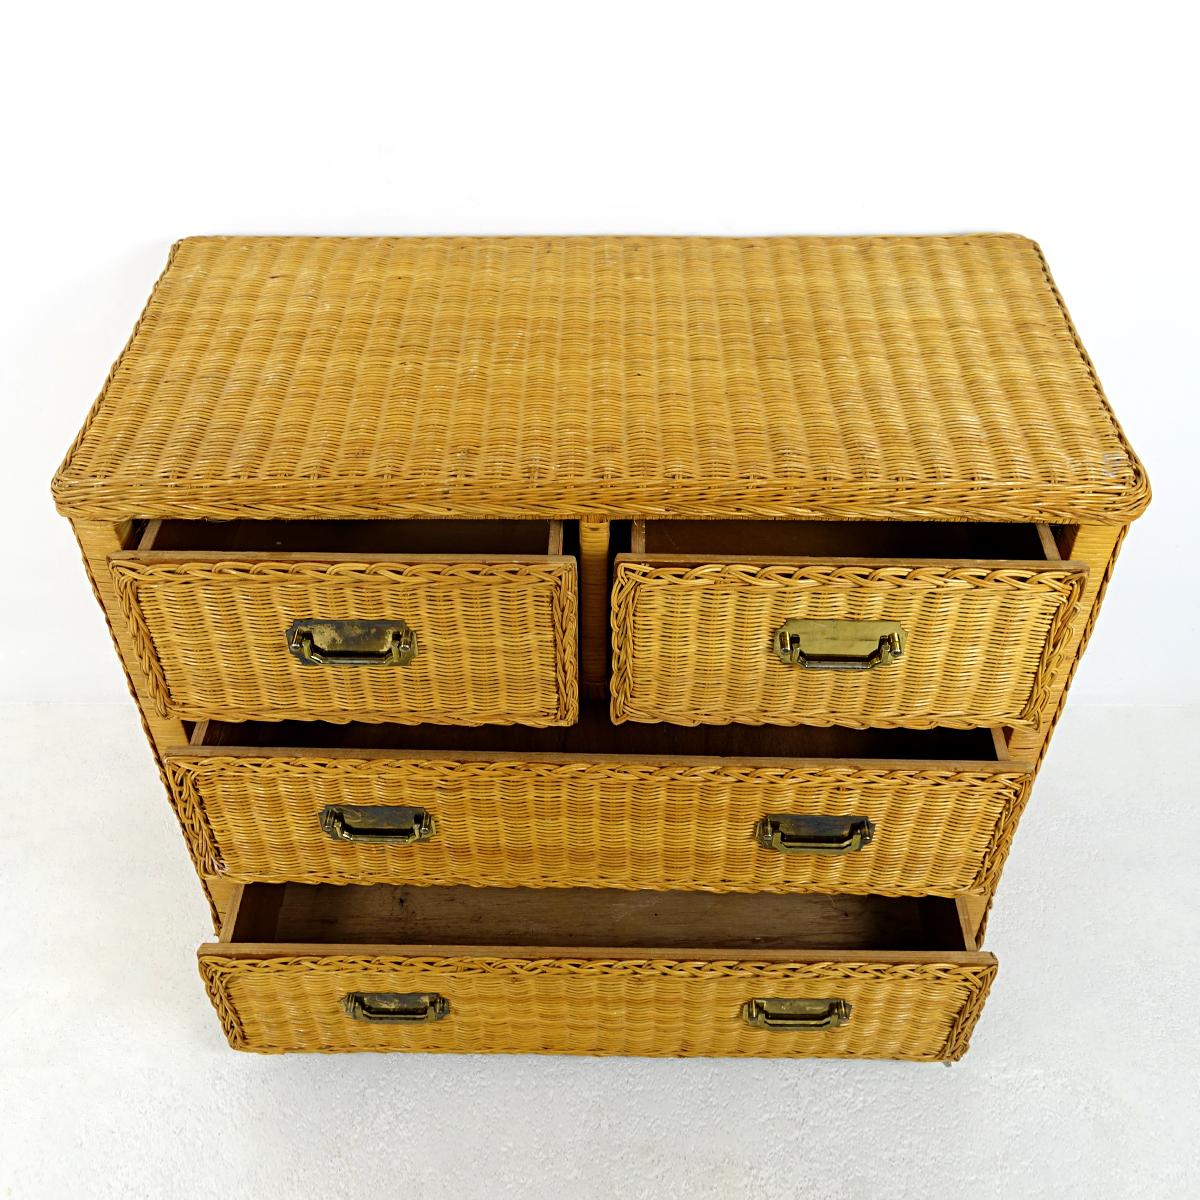 Dutch Colonial Style Rattan Low Chest of Drawers with Brass Handles